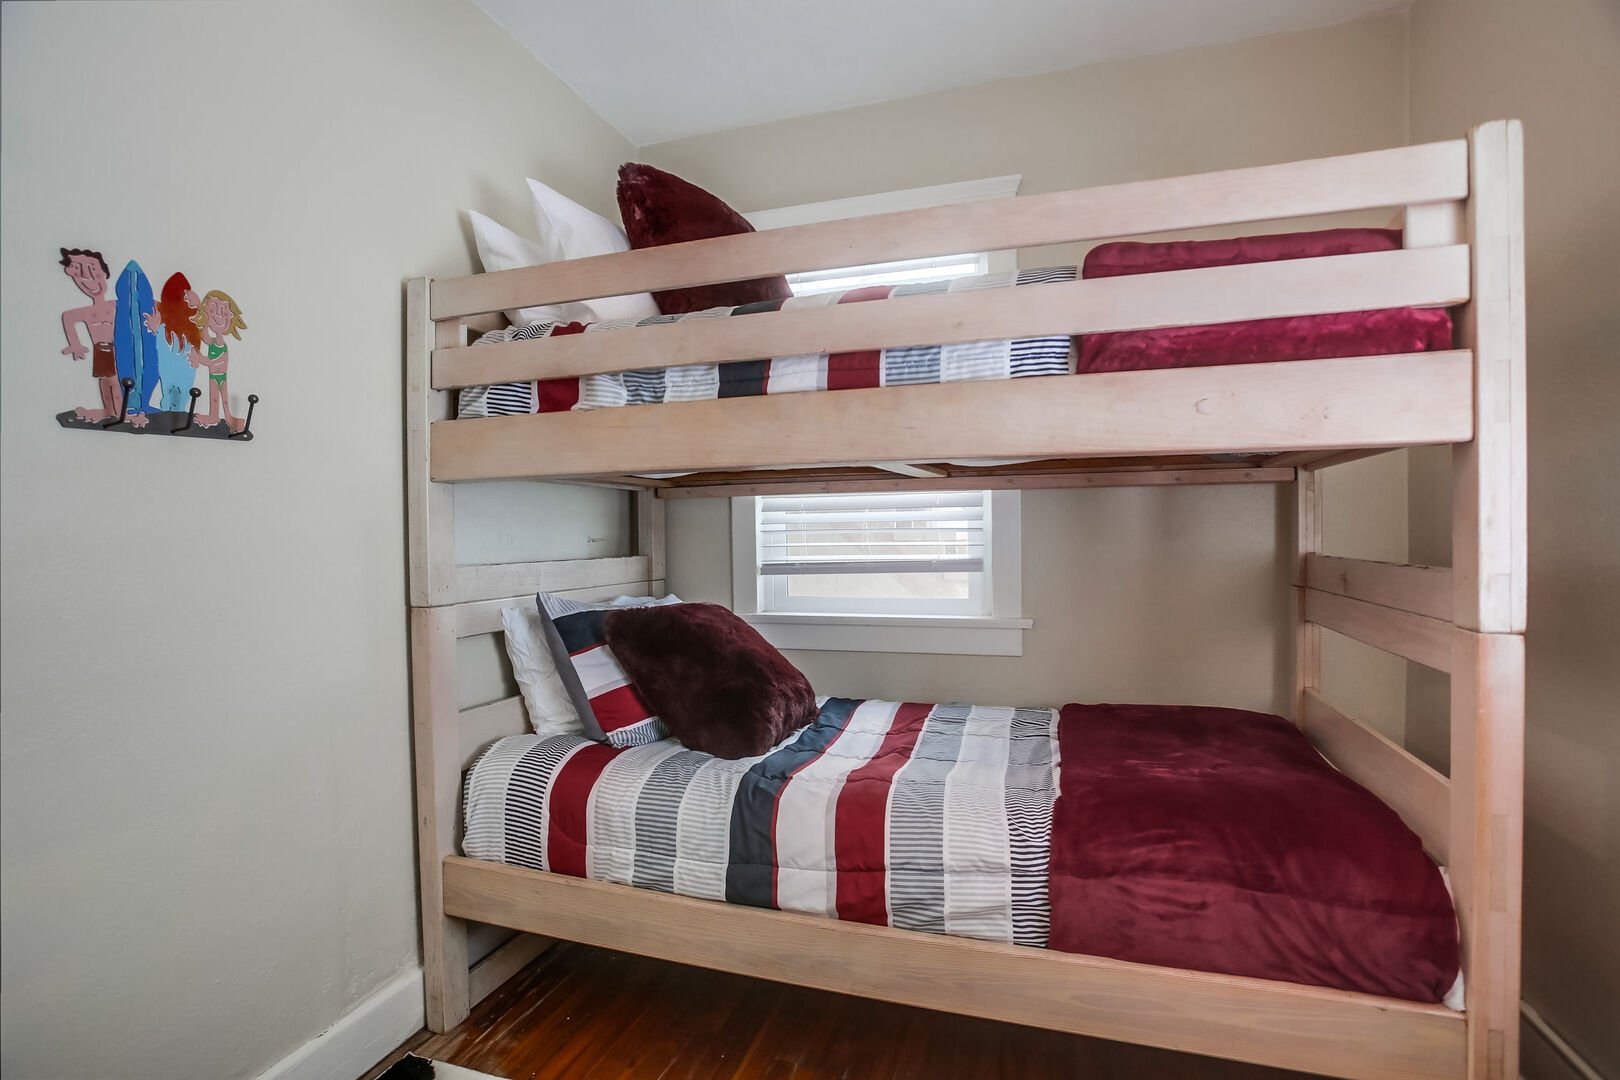 Guest bedroom with twin size bunk beds, there is also a blade-less ceiling fan